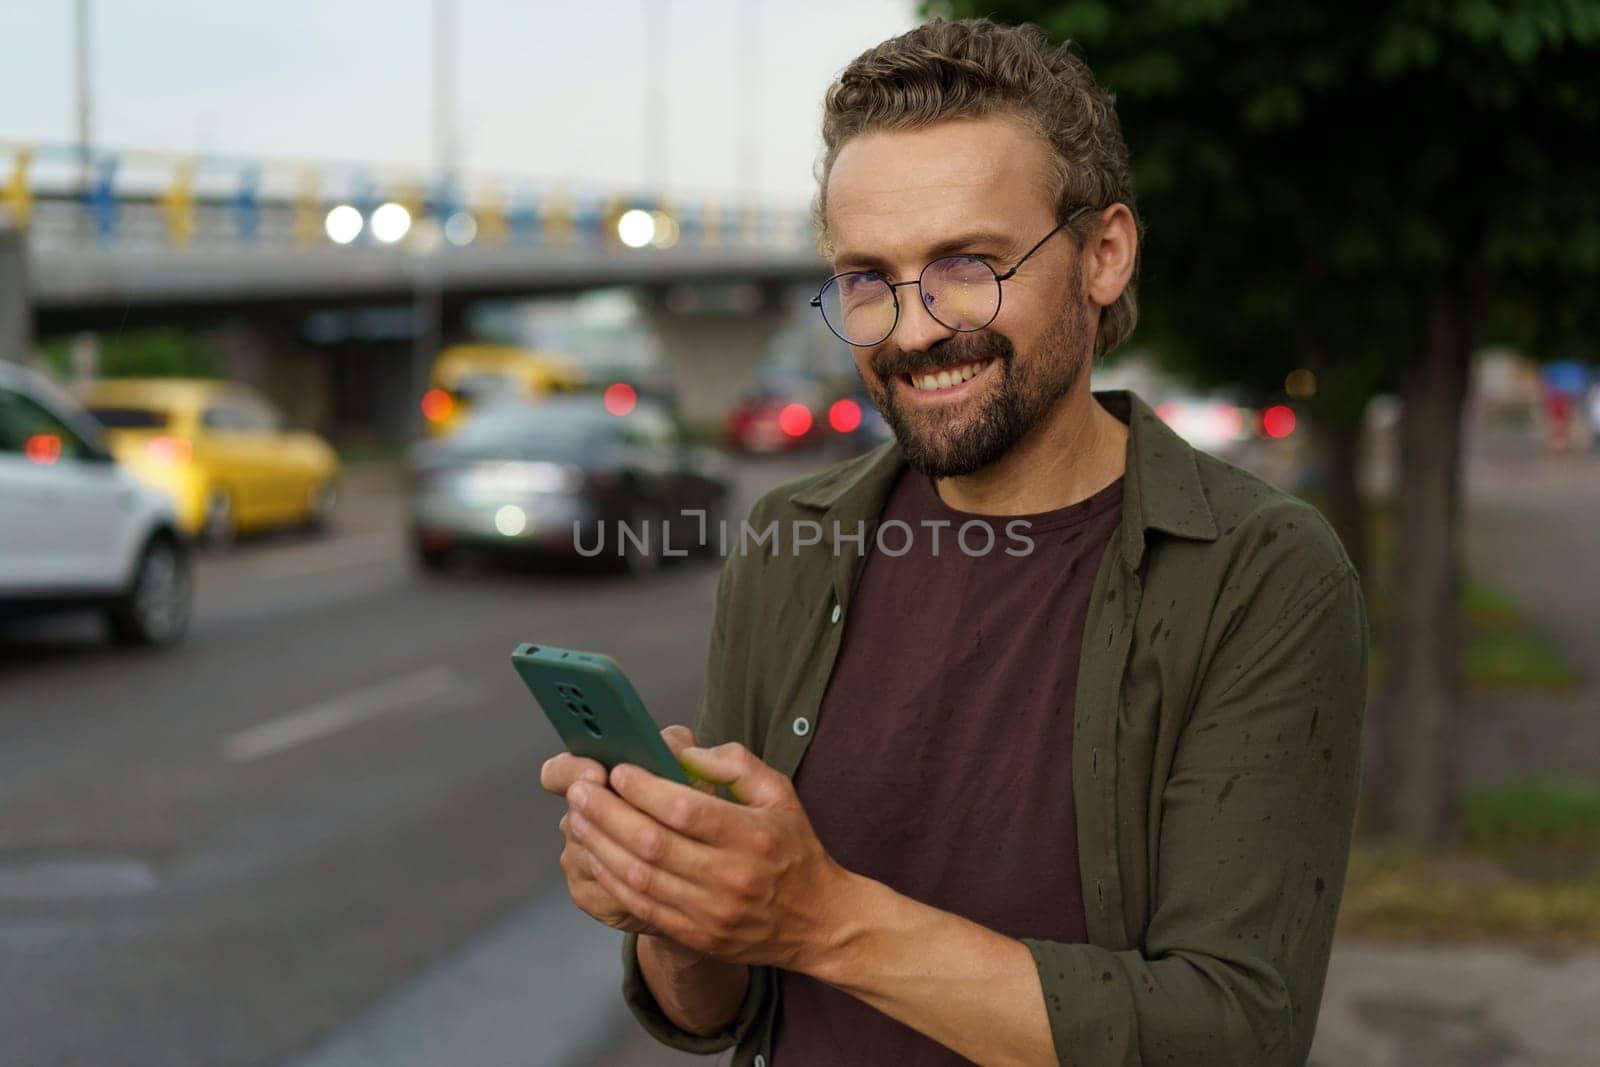 Happy customer making order for taxi cab. With smile on face, man uses phone to book ride while dusk sets in and street lights illuminate city. Presence of cars signifies bustling nature of city.